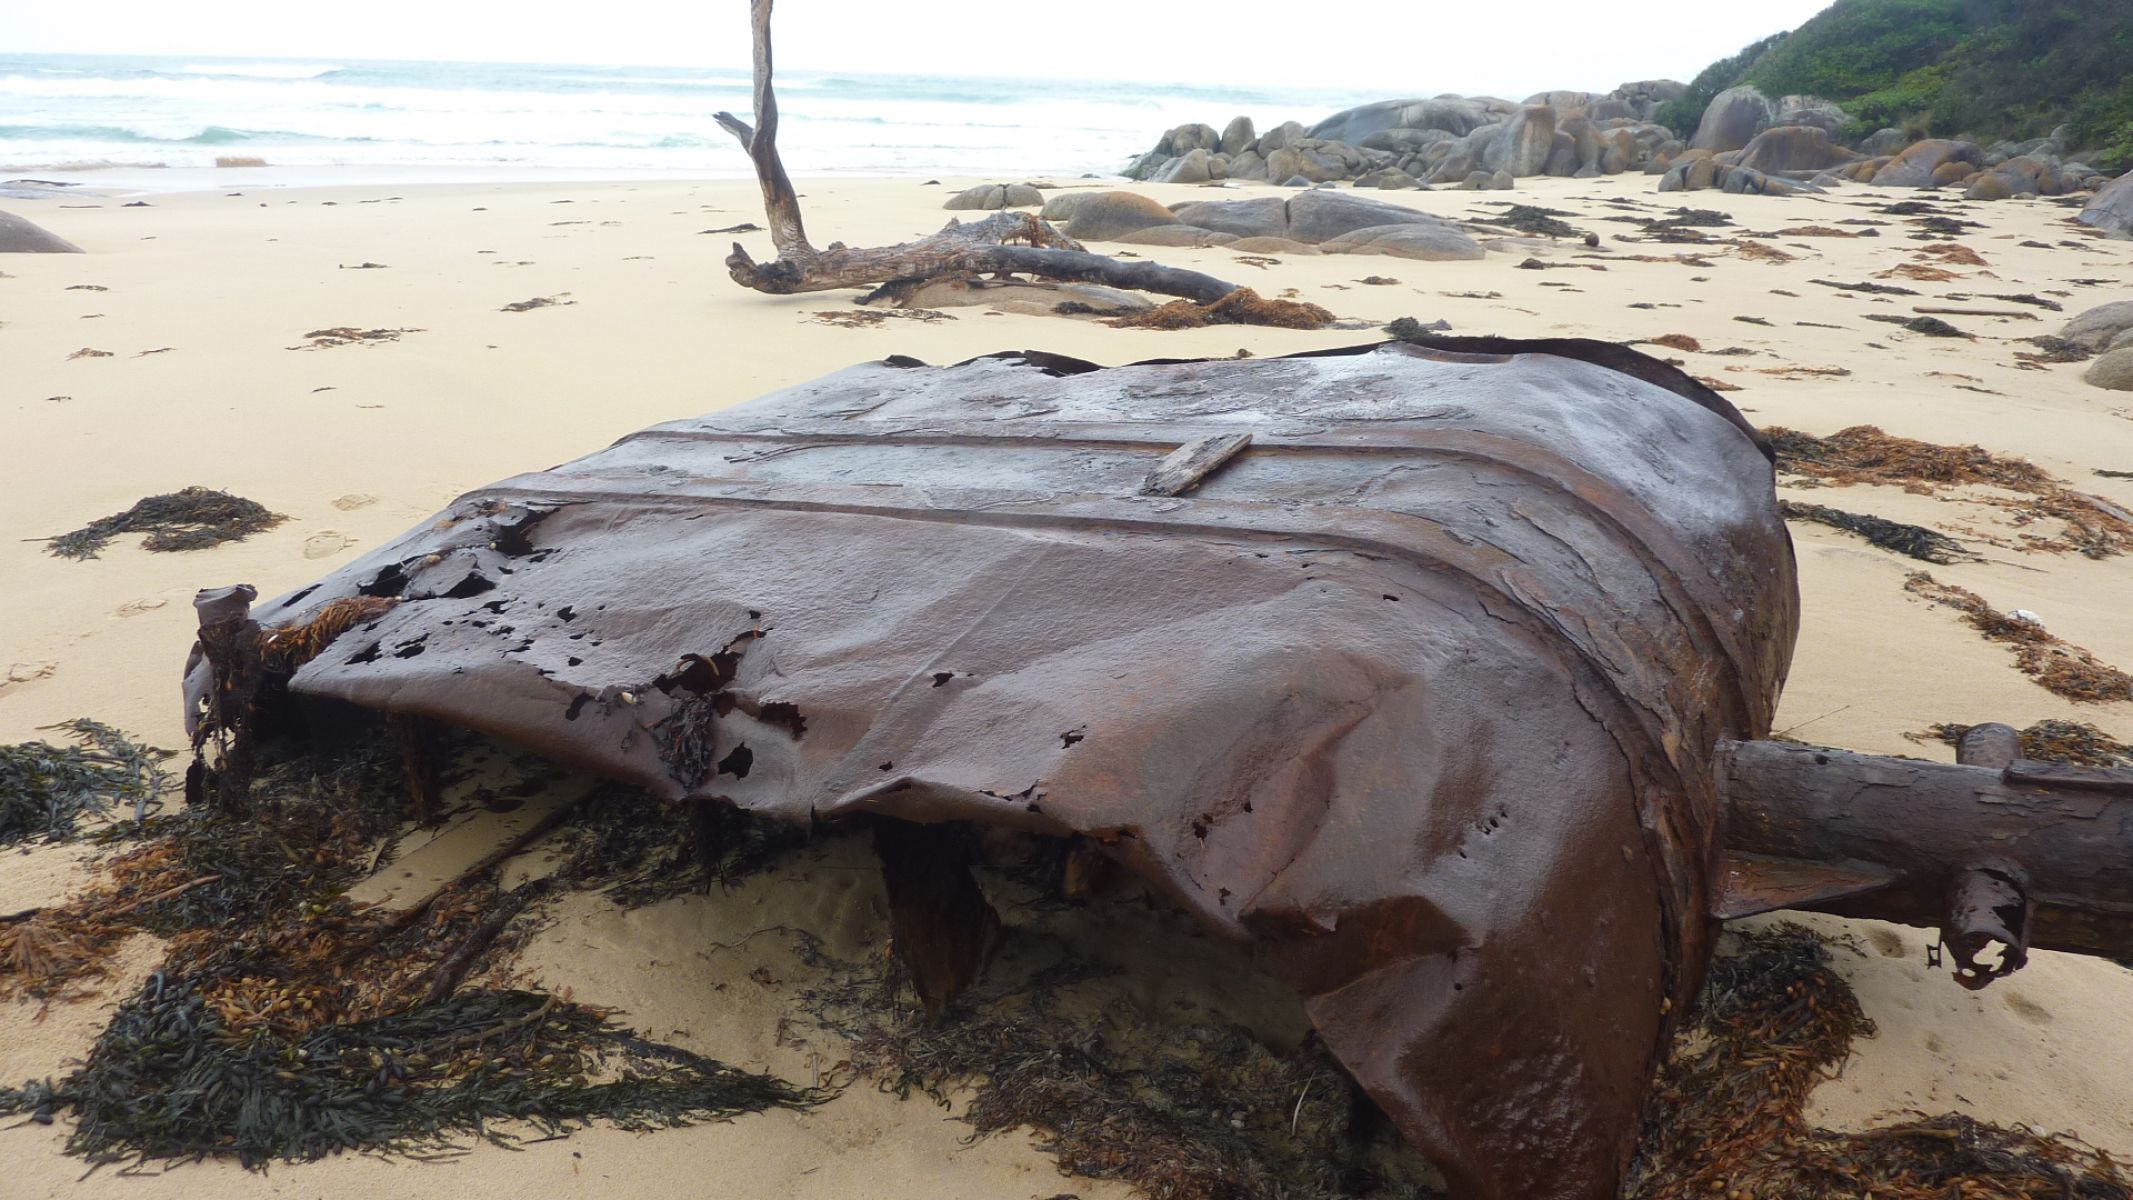 Image shows of piece of shipwreck wreckage on a beach